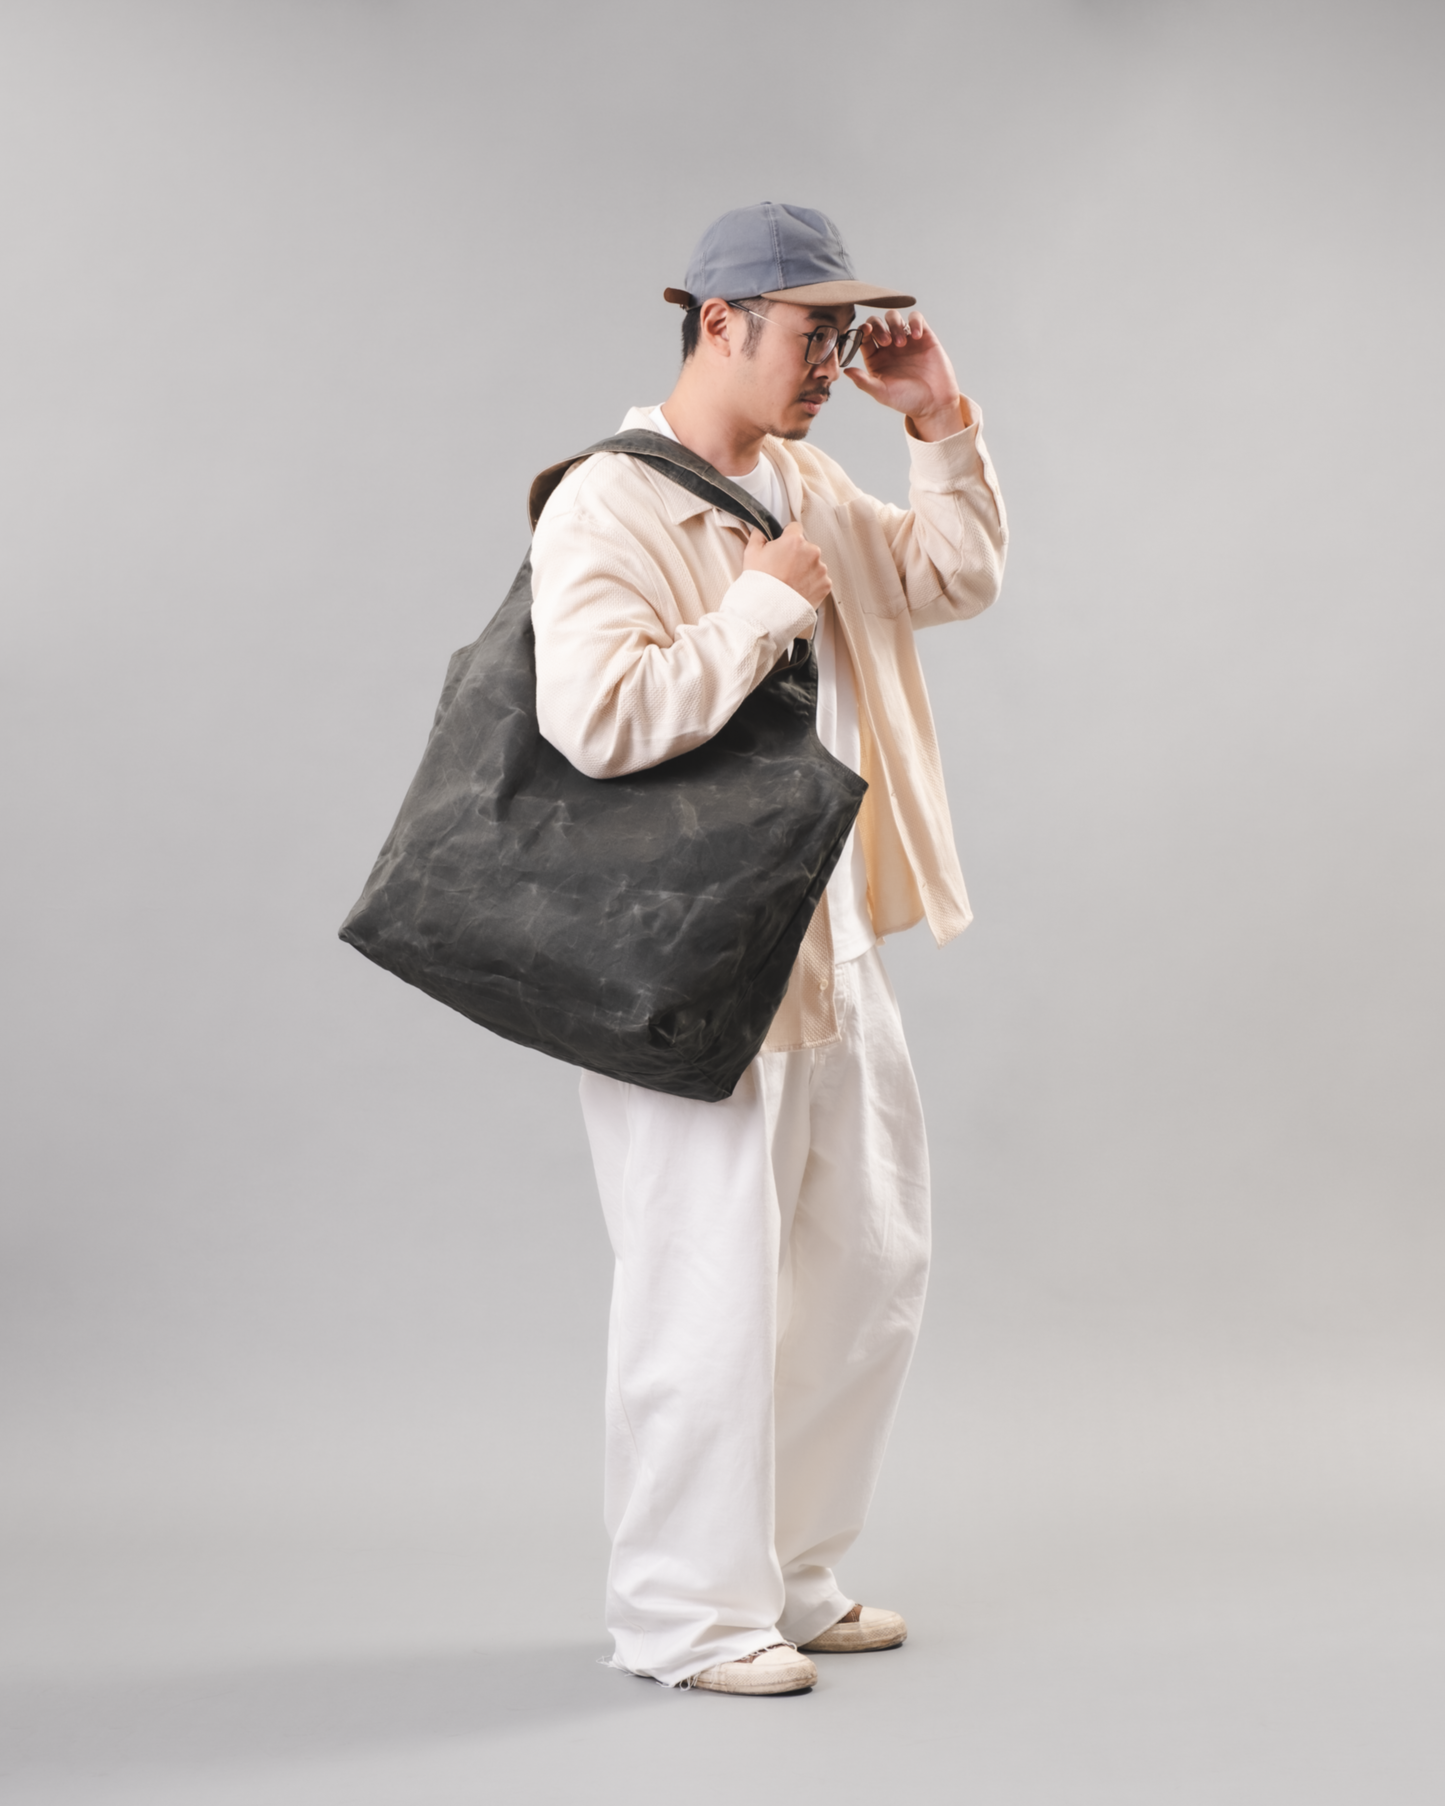 REVERSIBLE MARKET TOTE (Large) - SAND & MOSS